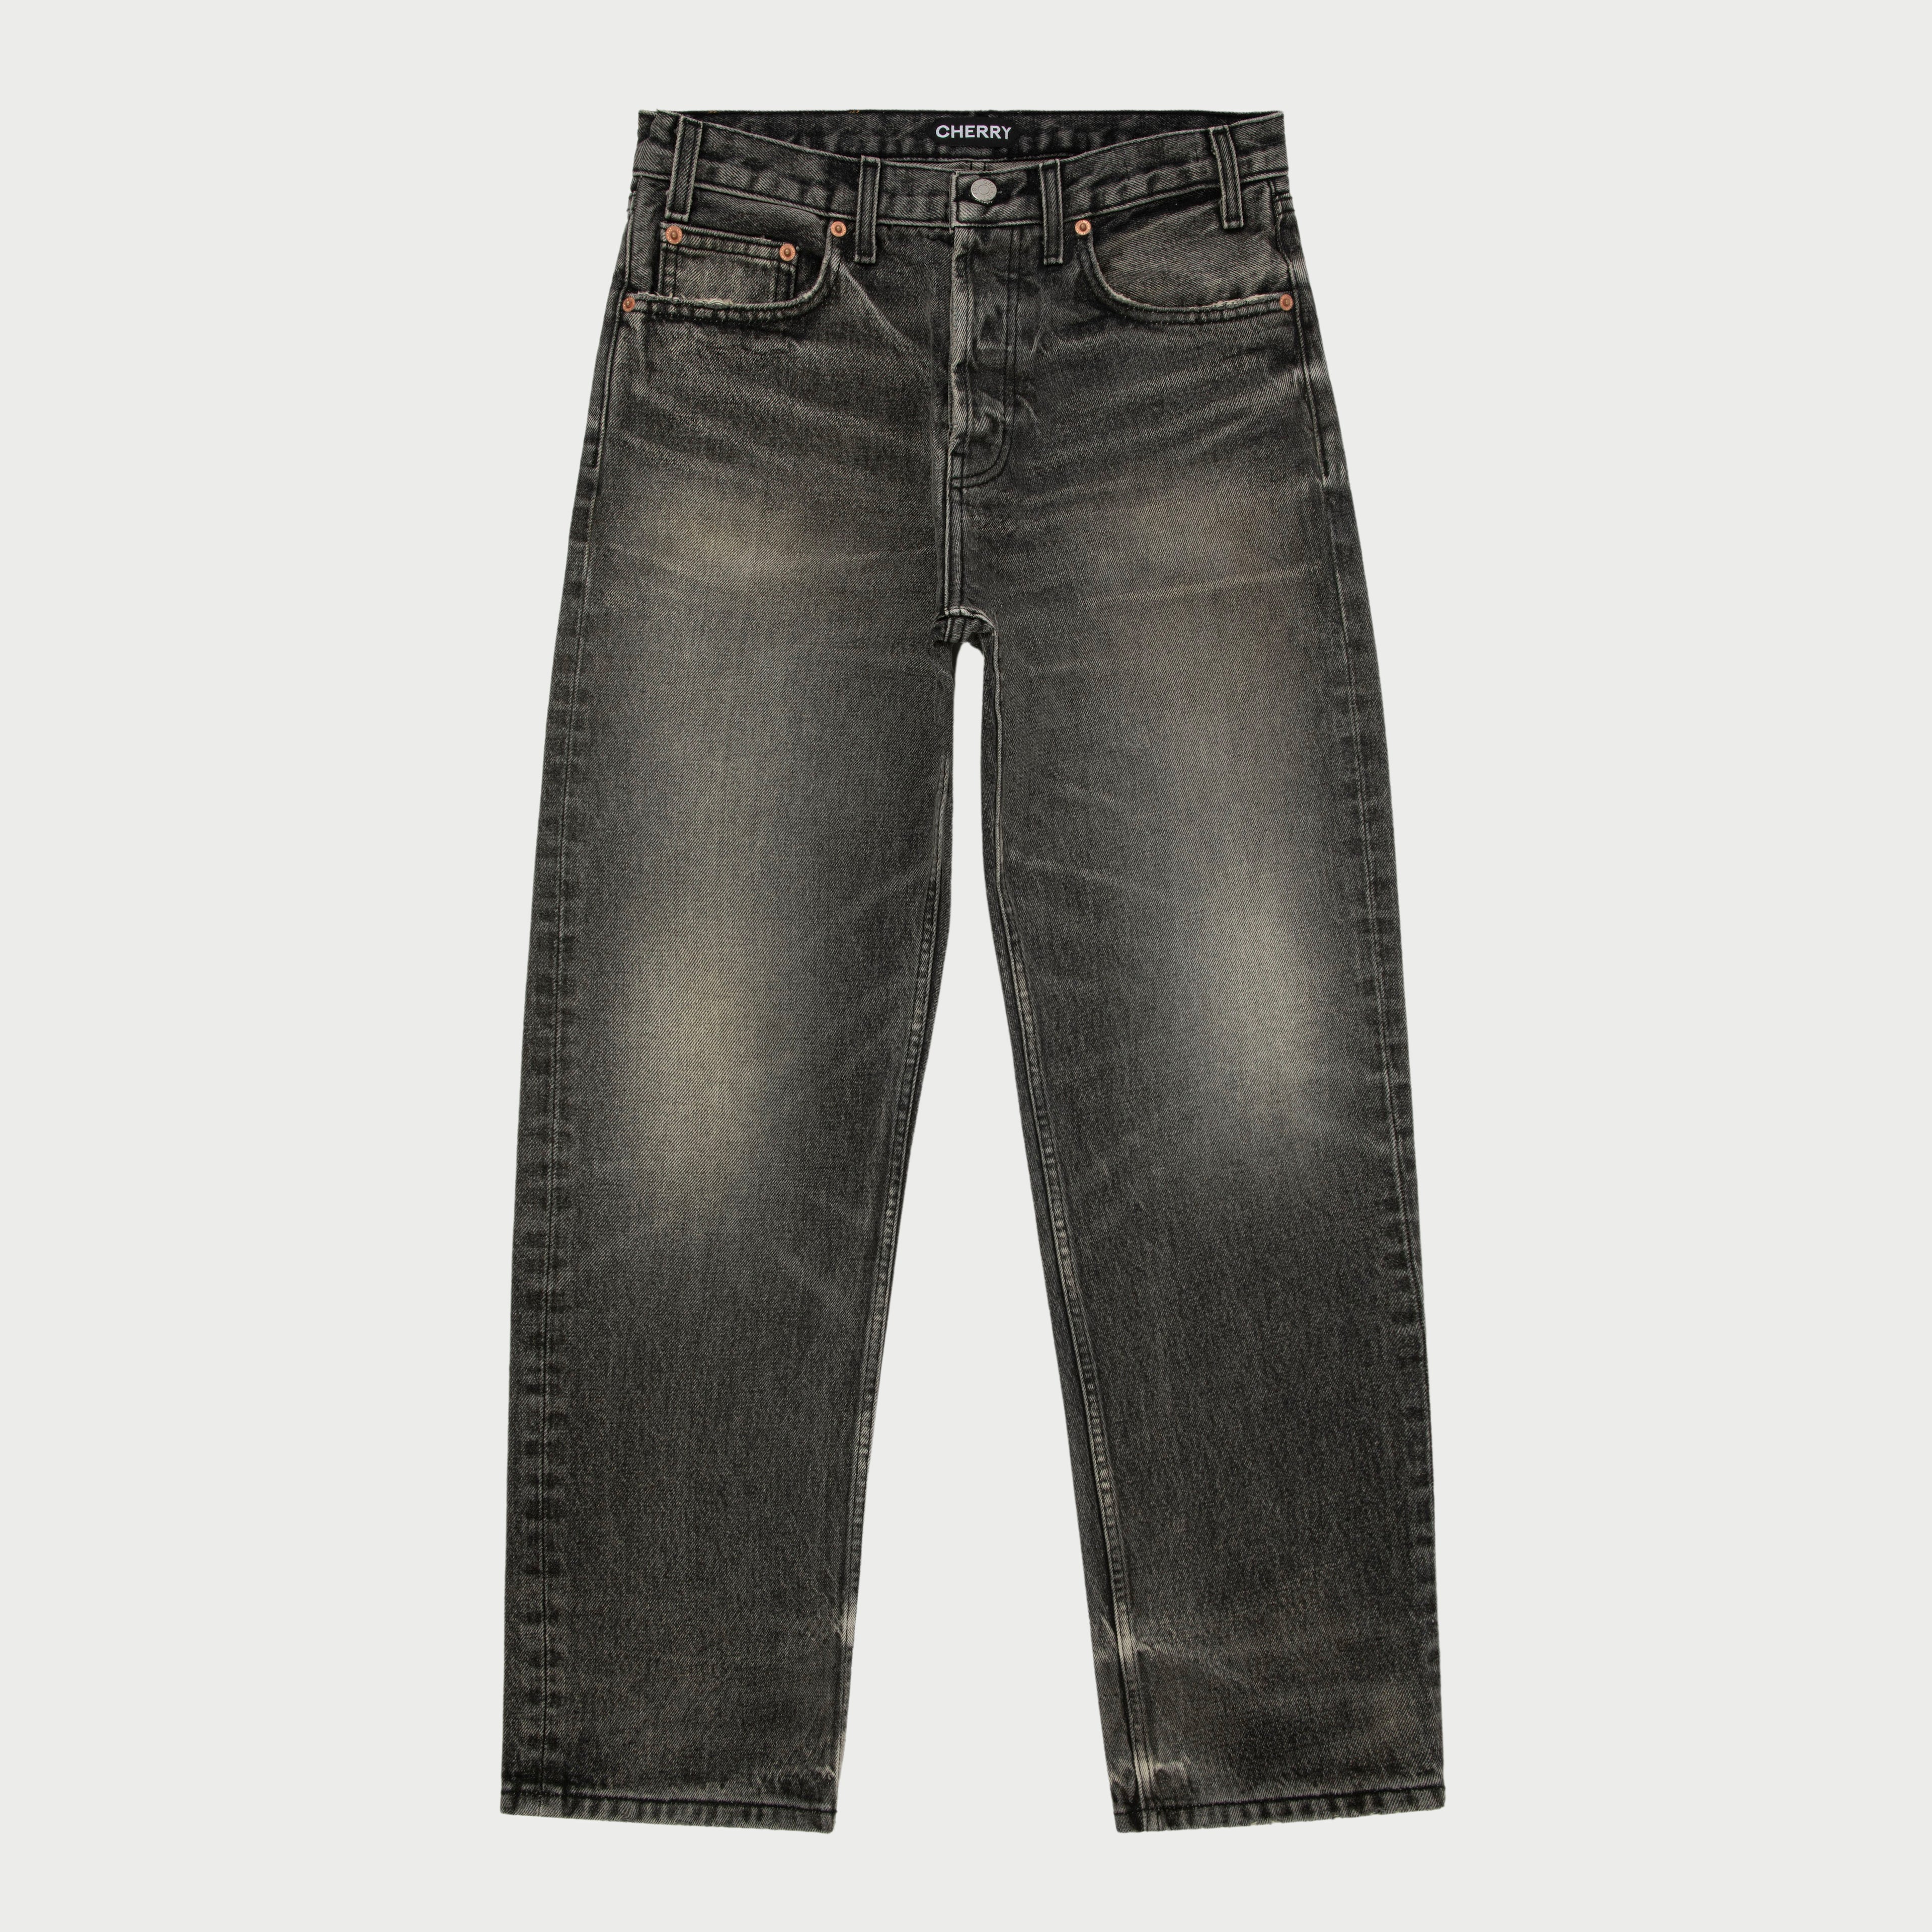 RELAXED_5_POCKET_JEANS_GREY_1.jpg